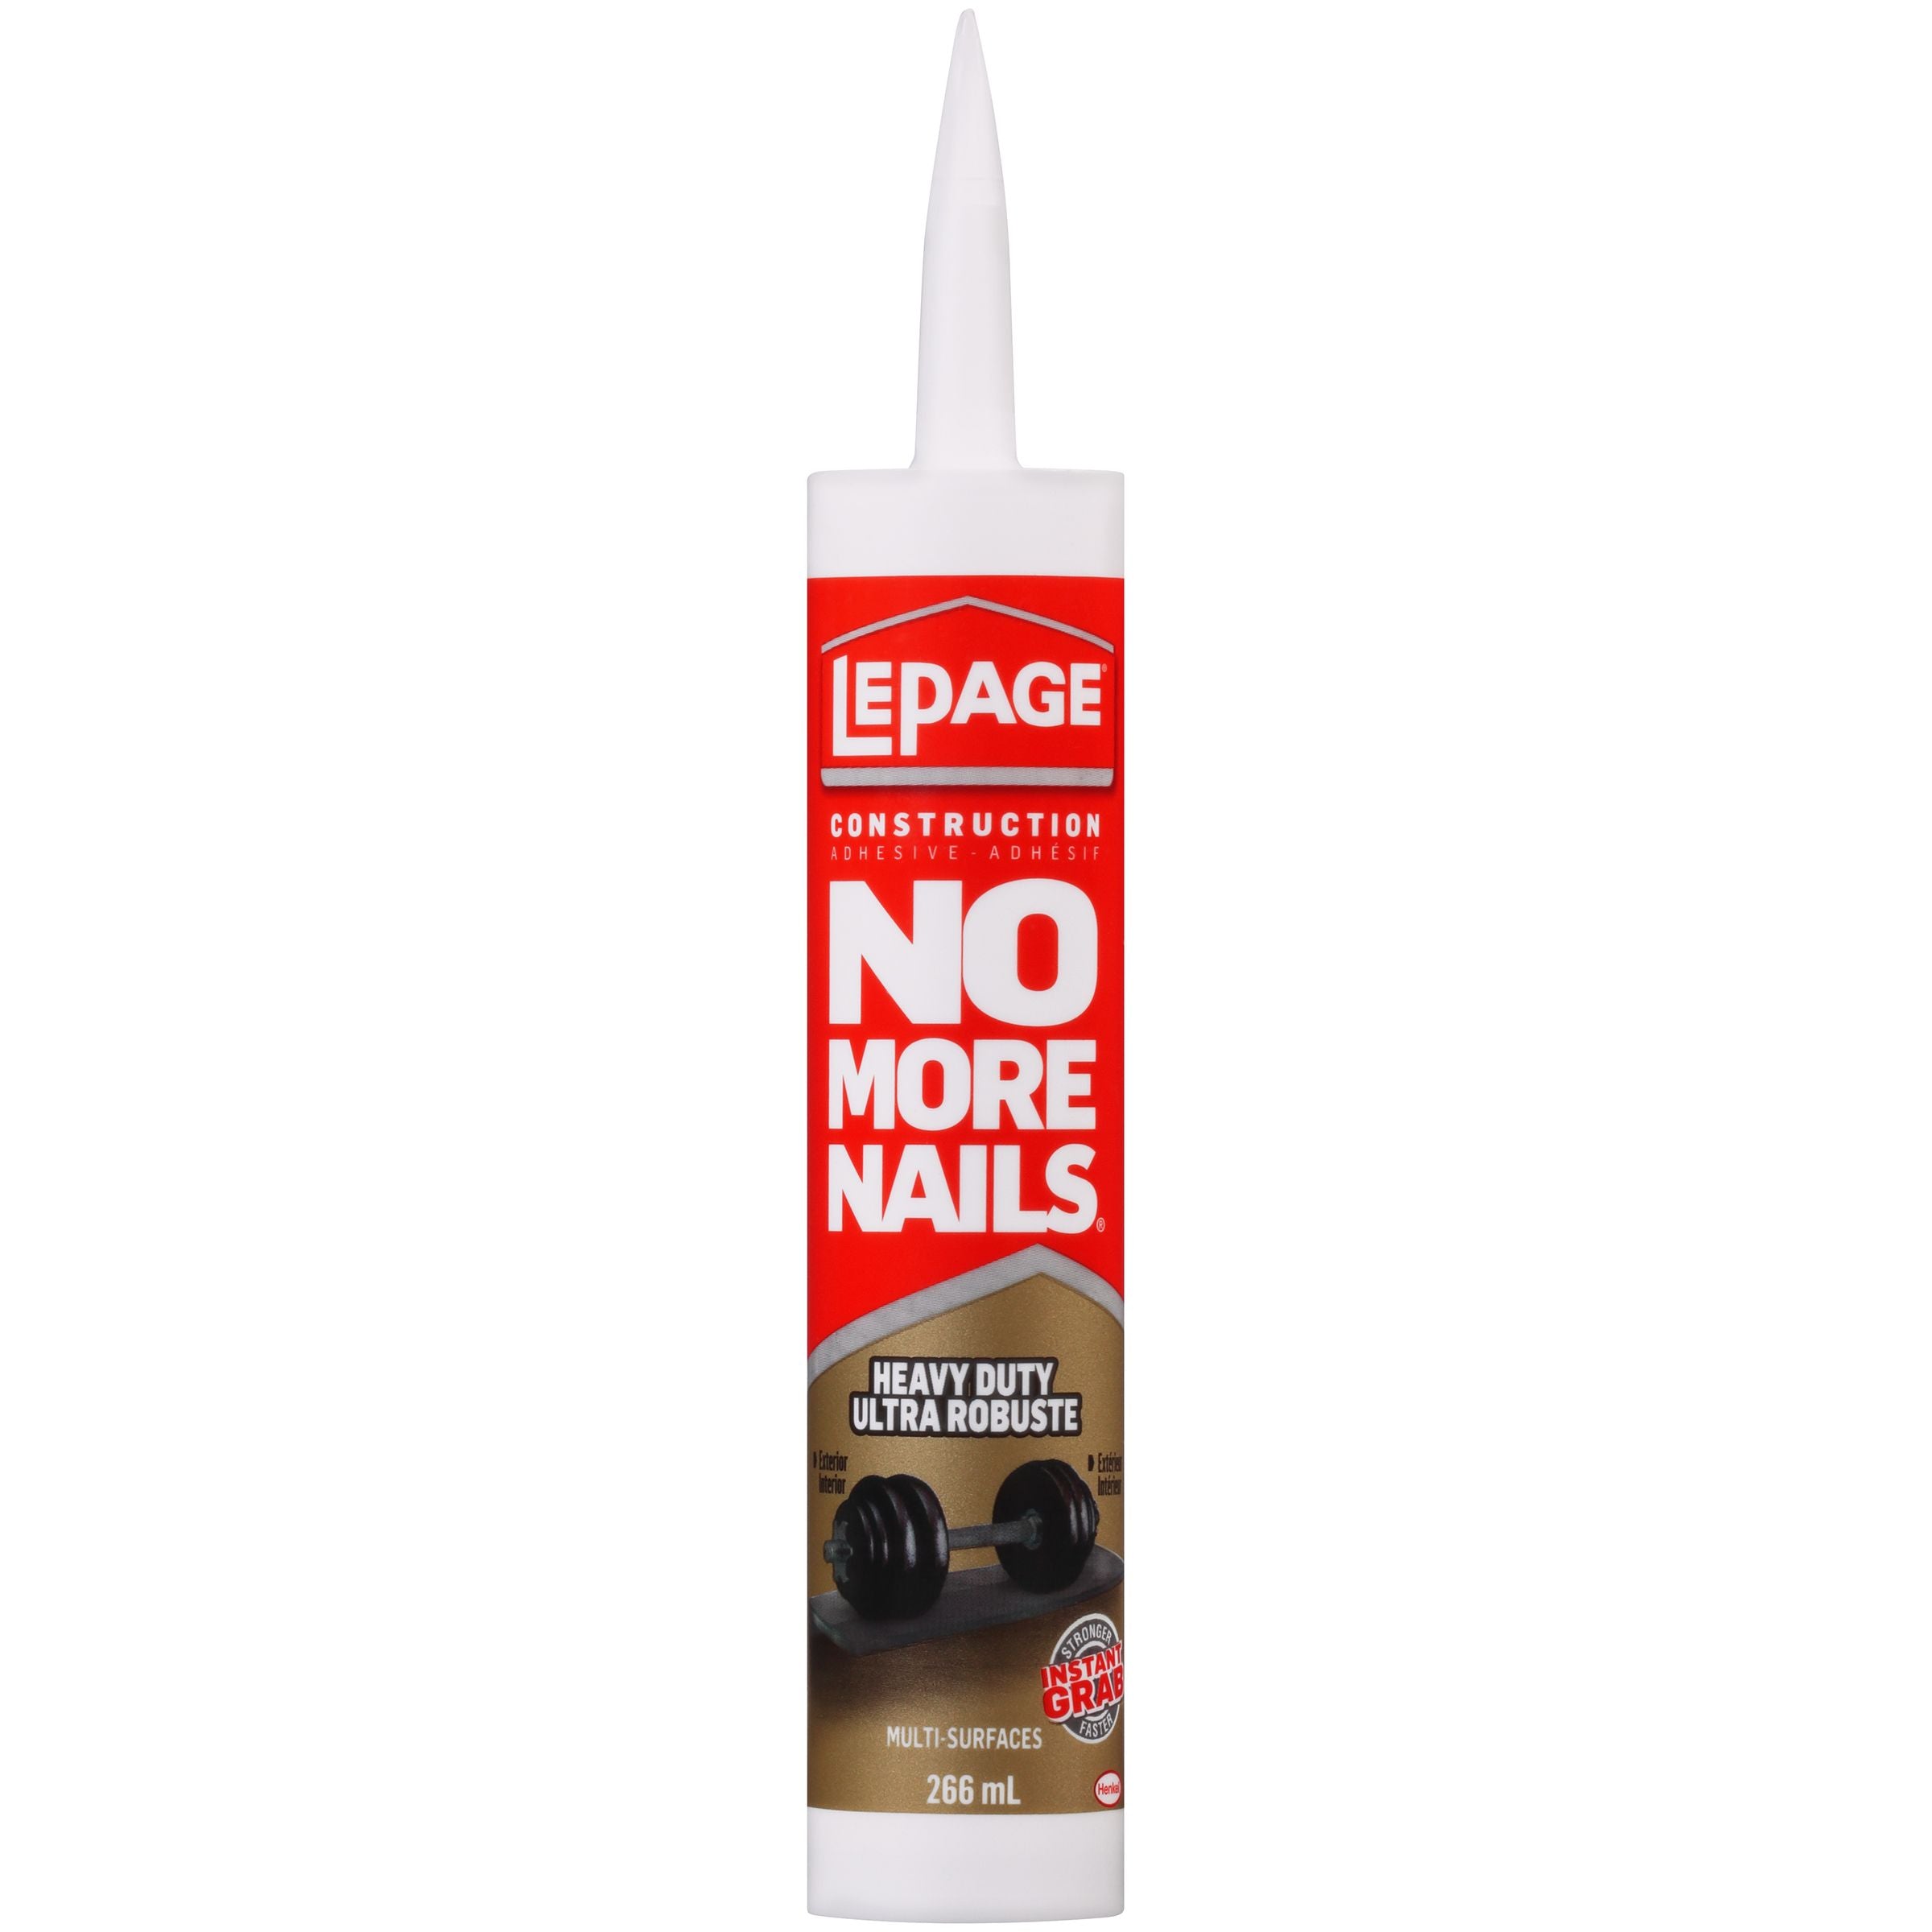 LePage No More Nails Heavy Duty Construction Adhesive, White, 266 ml Cartridge, Pack of 1